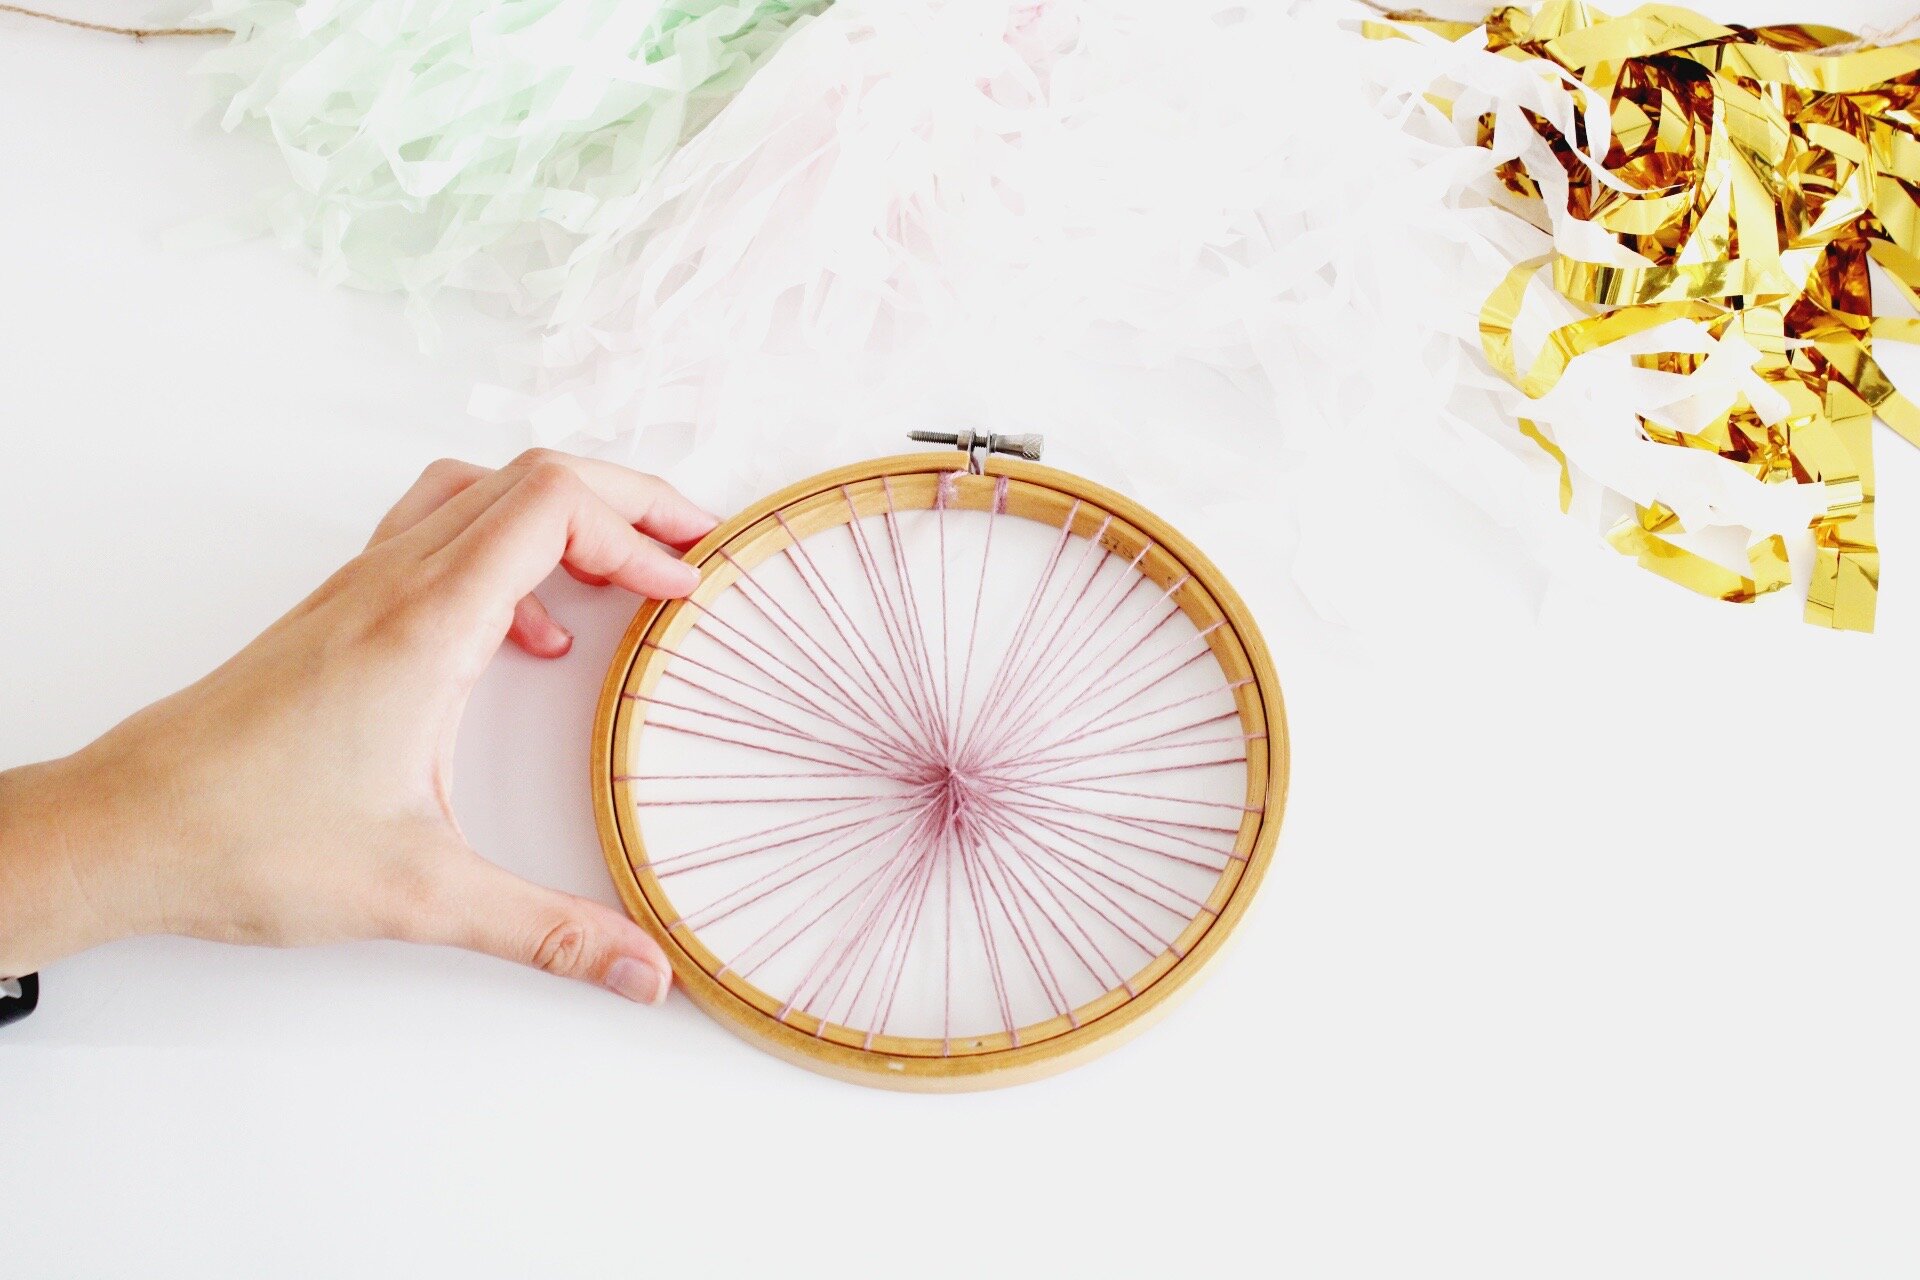 Weaving Lessons, How to Use an Embroidery Hoop as a Loom